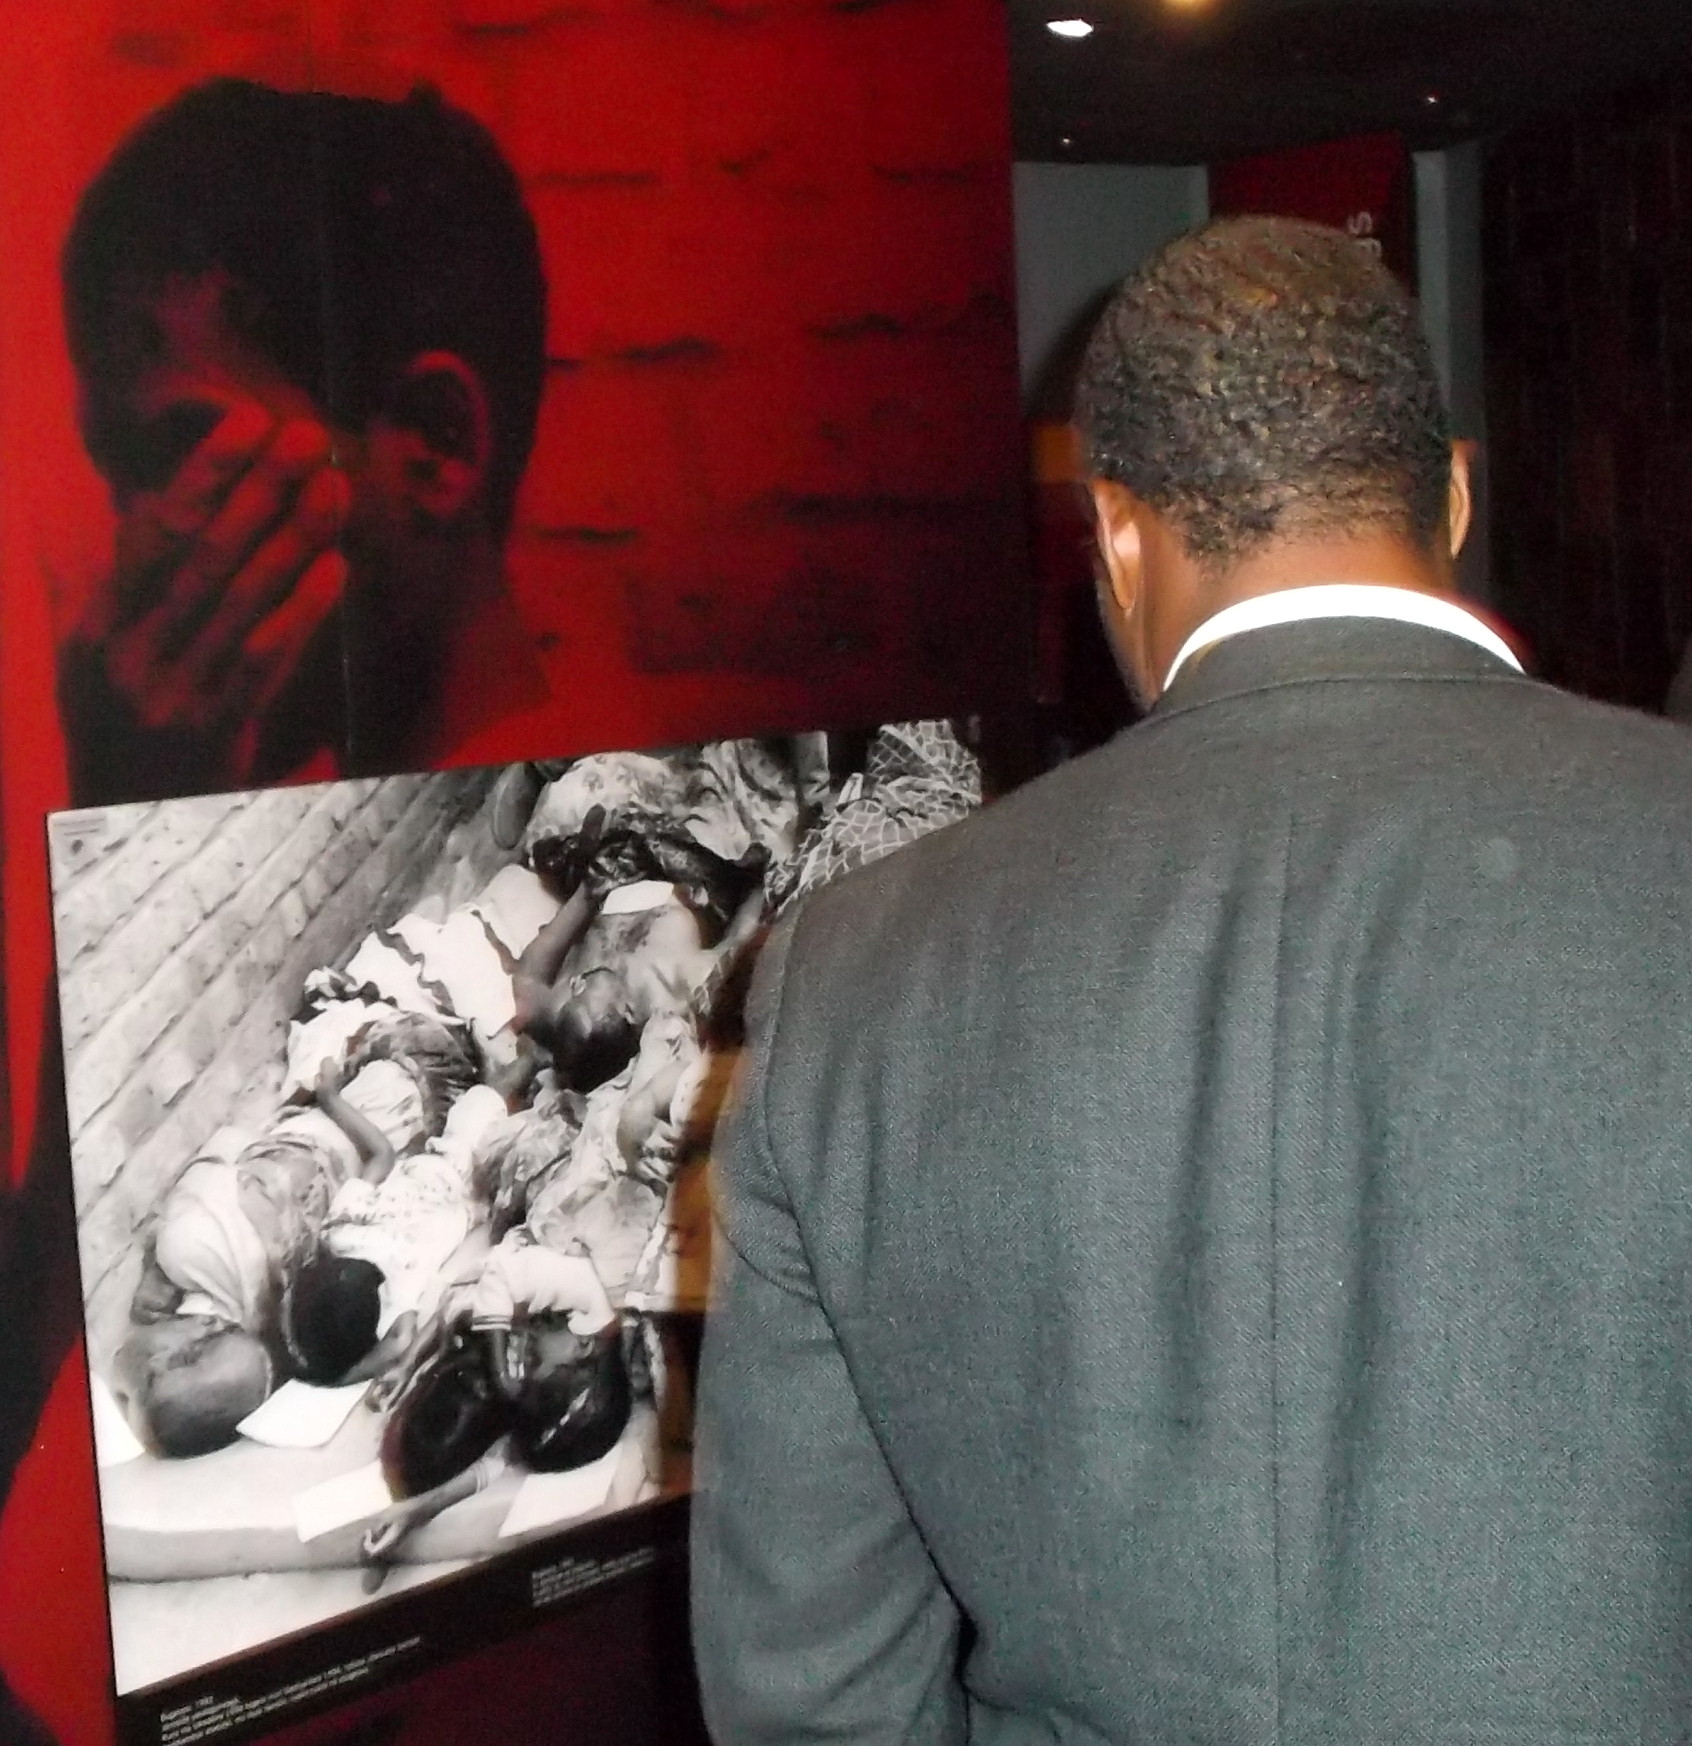 Rev. Shelvis Smith-Mather looks on at some of the gruesome and telling depictions in the National Genocide Memorial.